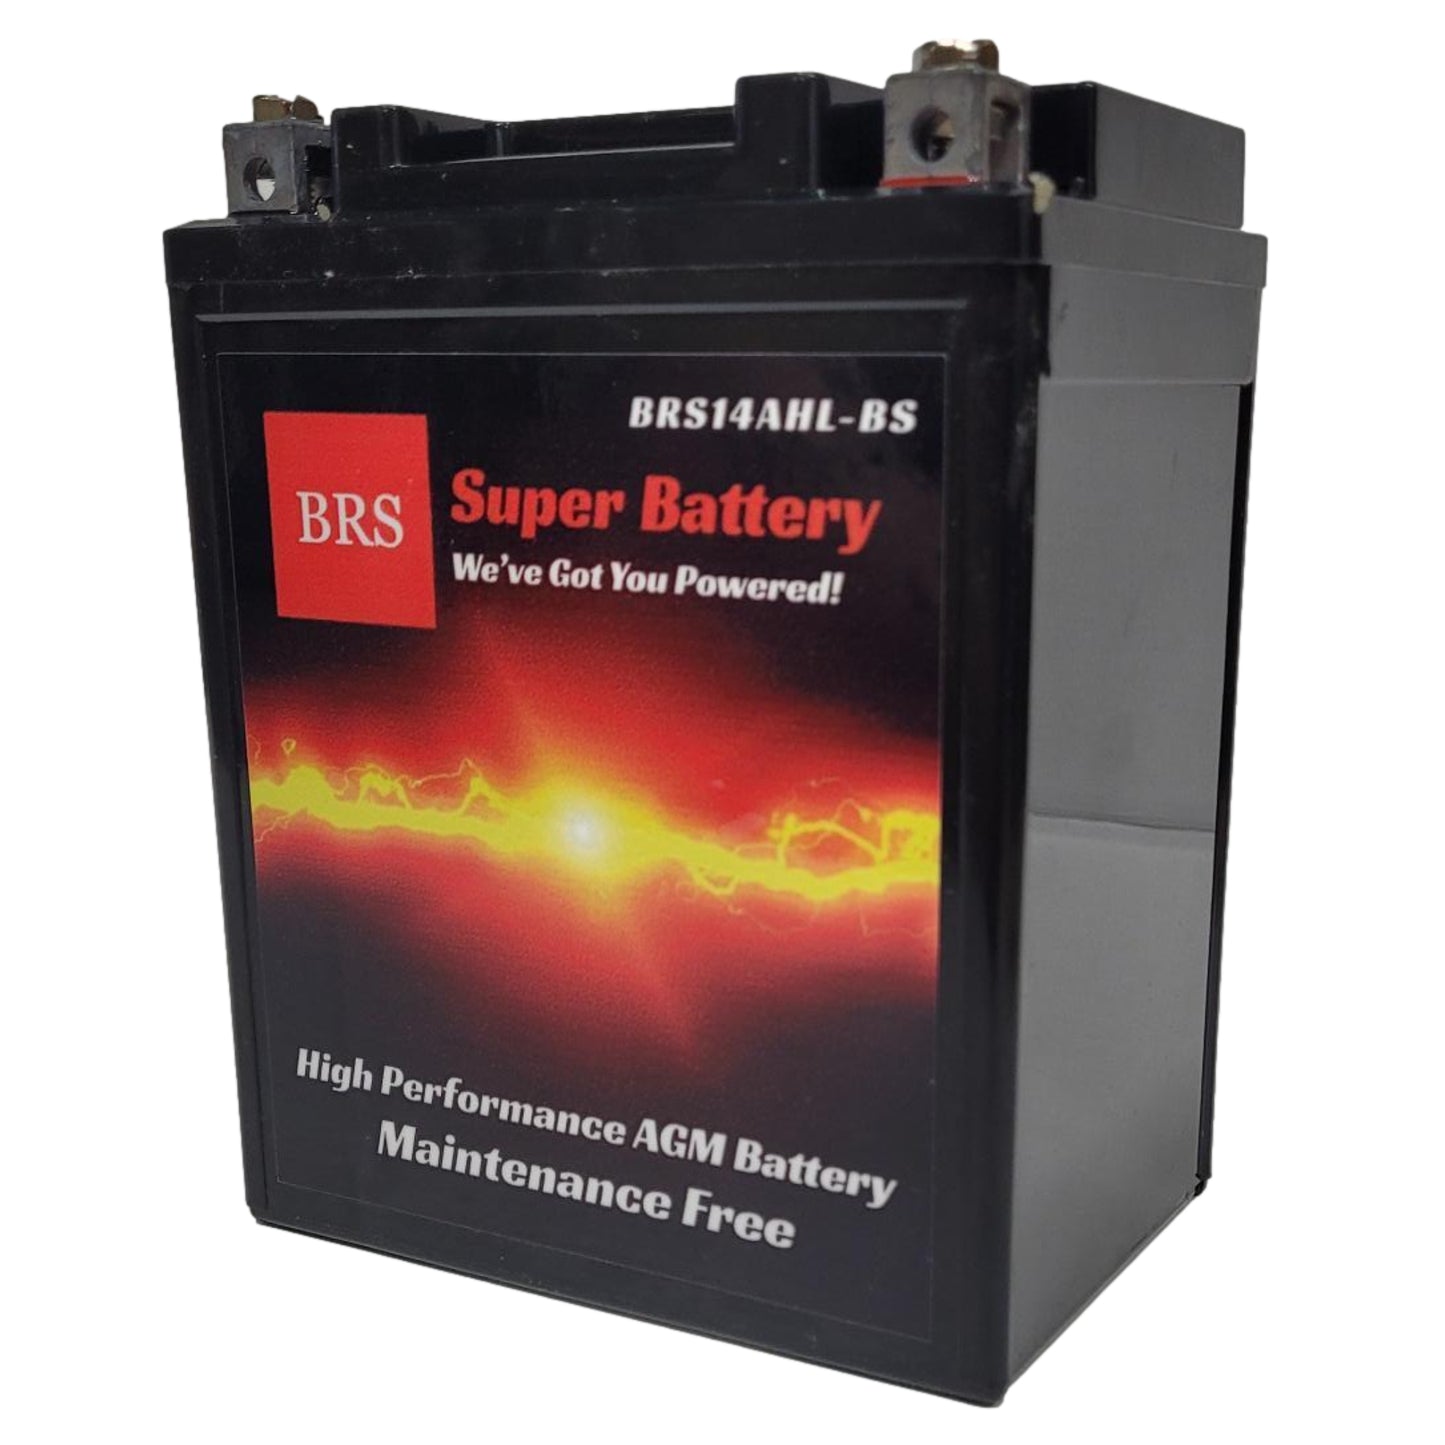 WPX14AHL-BS 12v High Performance Sealed AGM PowerSport 2 Year Battery - BRS Super Battery